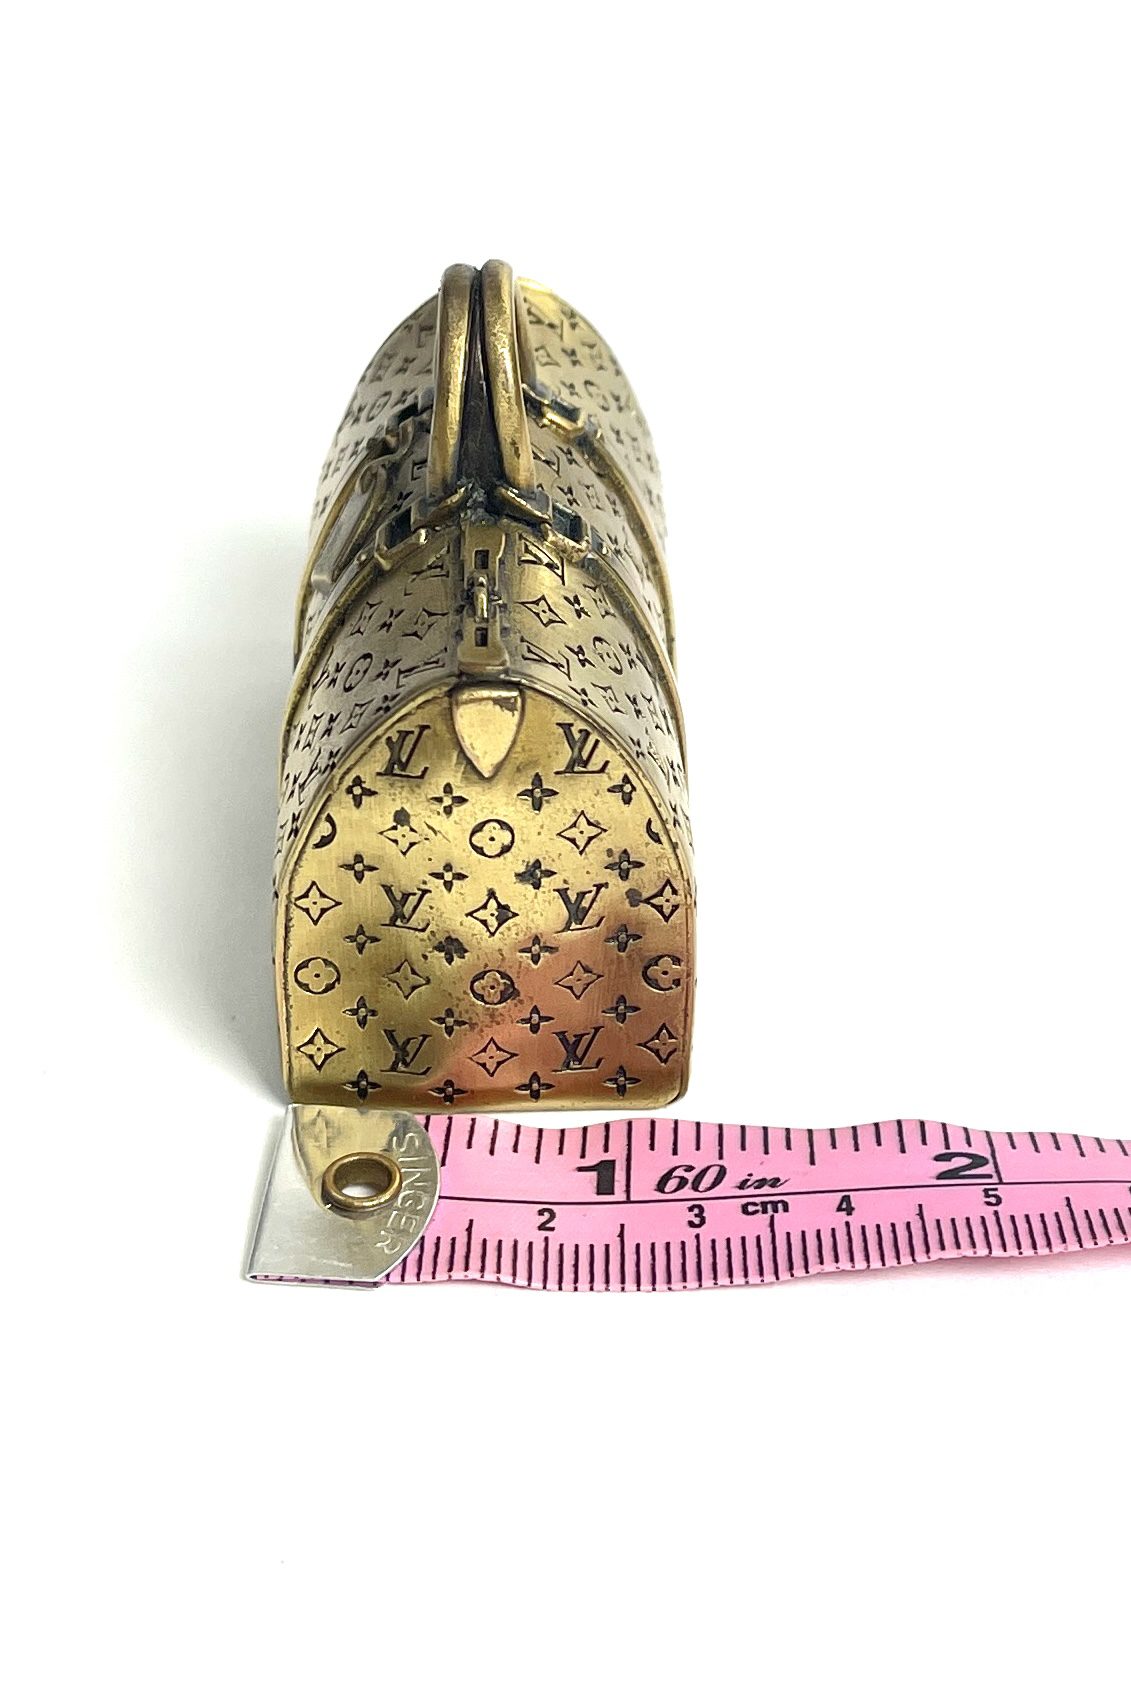 LOUIS VUITTON Keepall Type Paper Weight Metal VIP Only Gold Tone